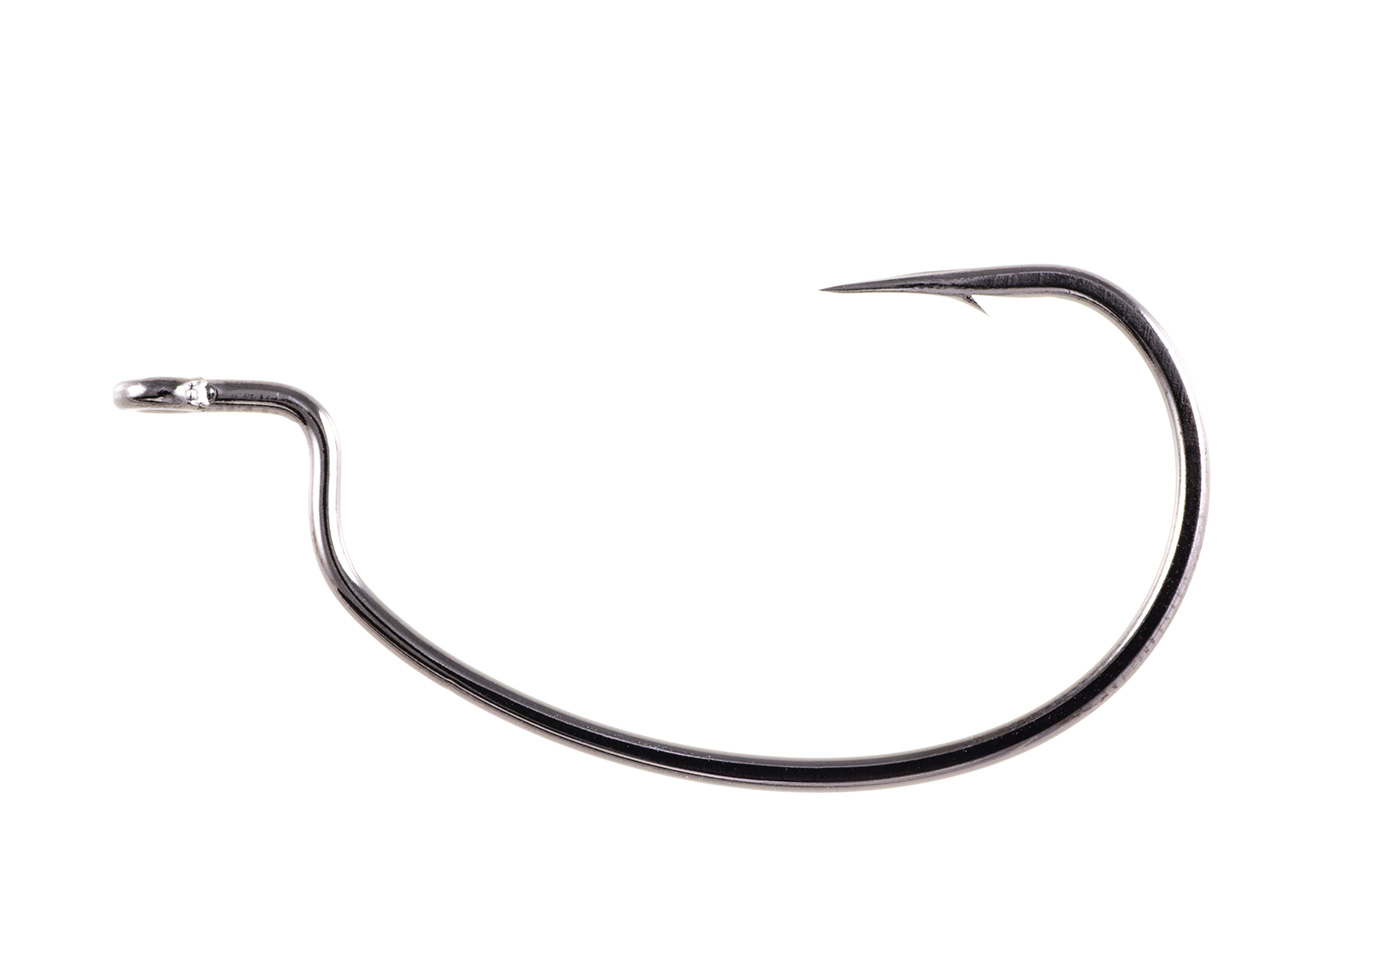 Owner Single Replacement Hook, Size 50, Needle Point XxxStrong, ZoWire,  Vacuum Tinned, 4PK 4102-159